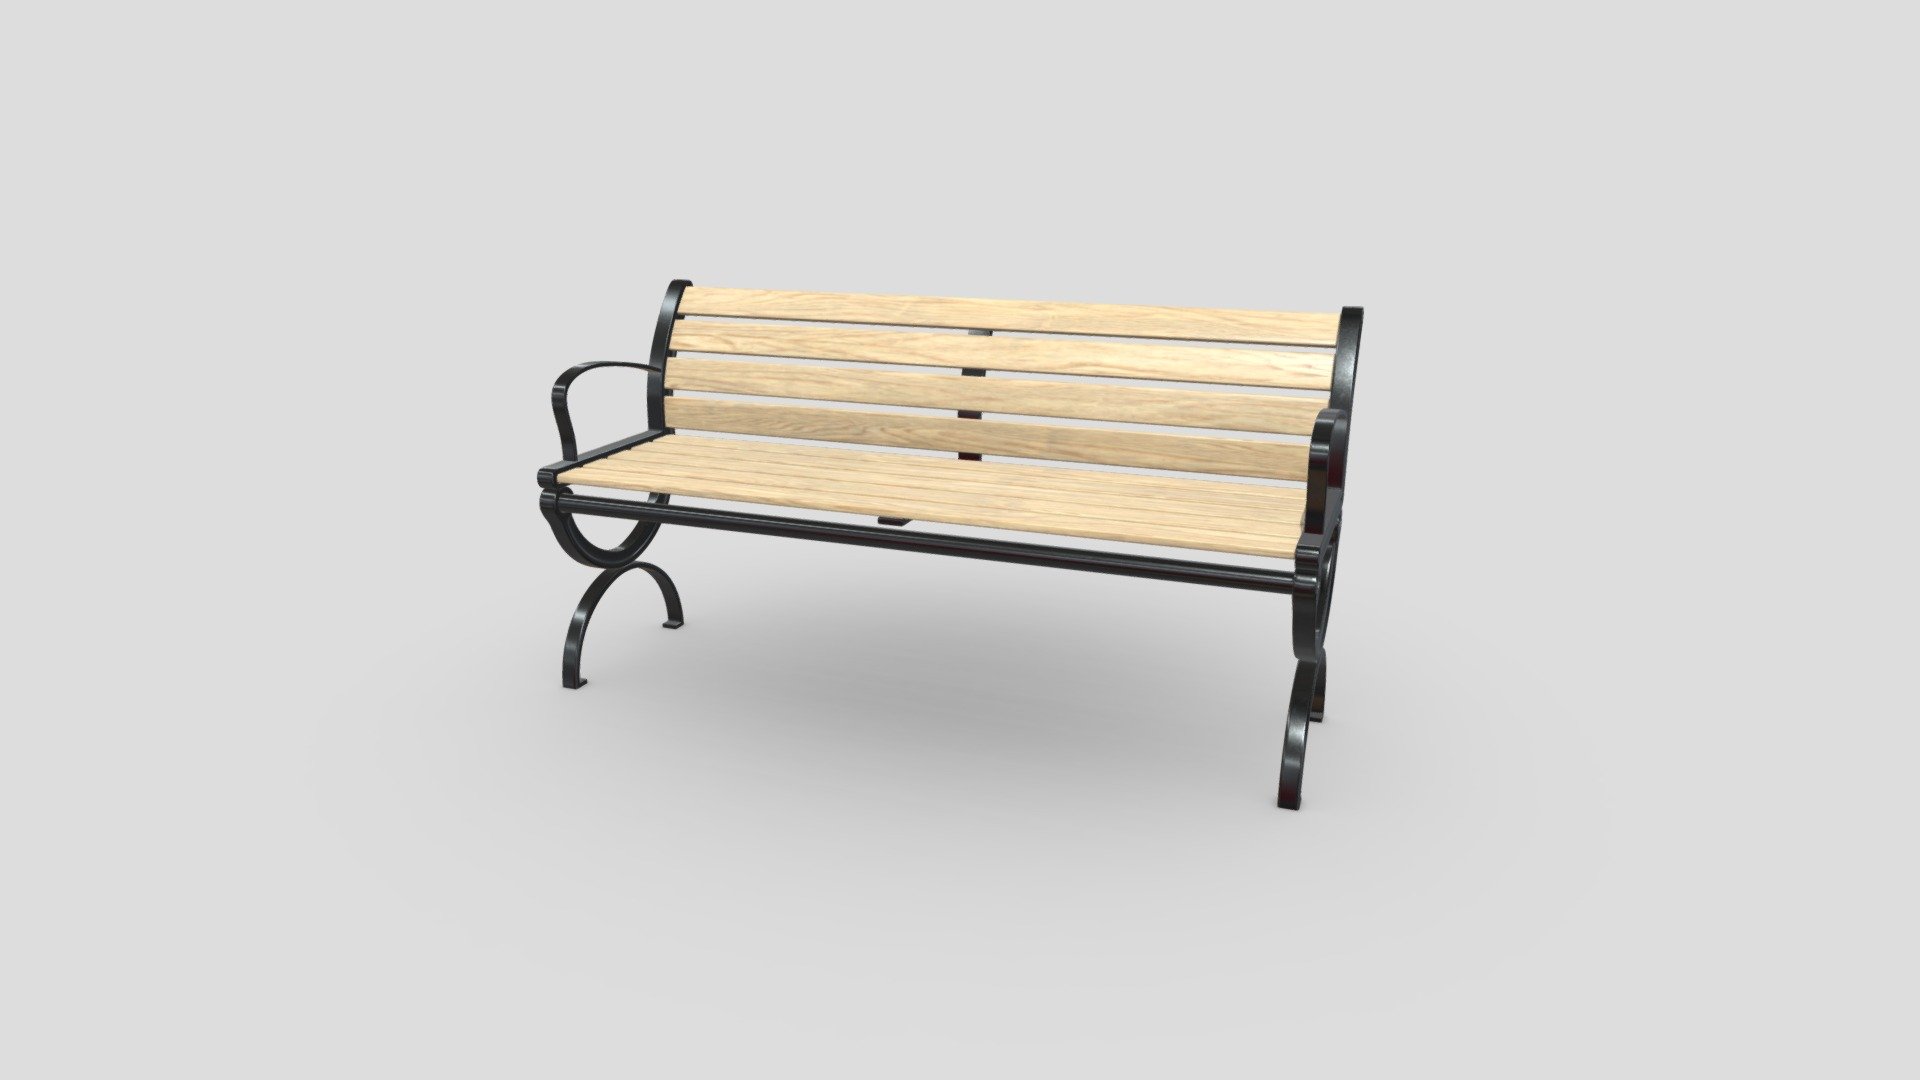 Park Bench 3D model made using Blender and Marmoset Toolbag. The base of the bench is made from metal materials and the seat is made from wooden materials. The materials have then been baked into game ready PBR textures.

Features:




1 park bench 3D model

Uses the metalness workflow and 4K PBR textures in PNG format

Textures can be downscaled if needed

3 wooden texture sets that can be swapped out at any time

Blend files for each texture set with linked textures/materials, camera setups and HDRi lighting

Model has been exported in FBX, OBJ, GLTF/GLB, and DAE/Collada file formats

GLTF file instructions and help document

Rendered images, wireframes, and extras

Included Textures:




AO, Diffuse, Roughness, Gloss, Metallic, Normal

UVLayout



 - City Park Bench - Buy Royalty Free 3D model by Pickle55100 3d model